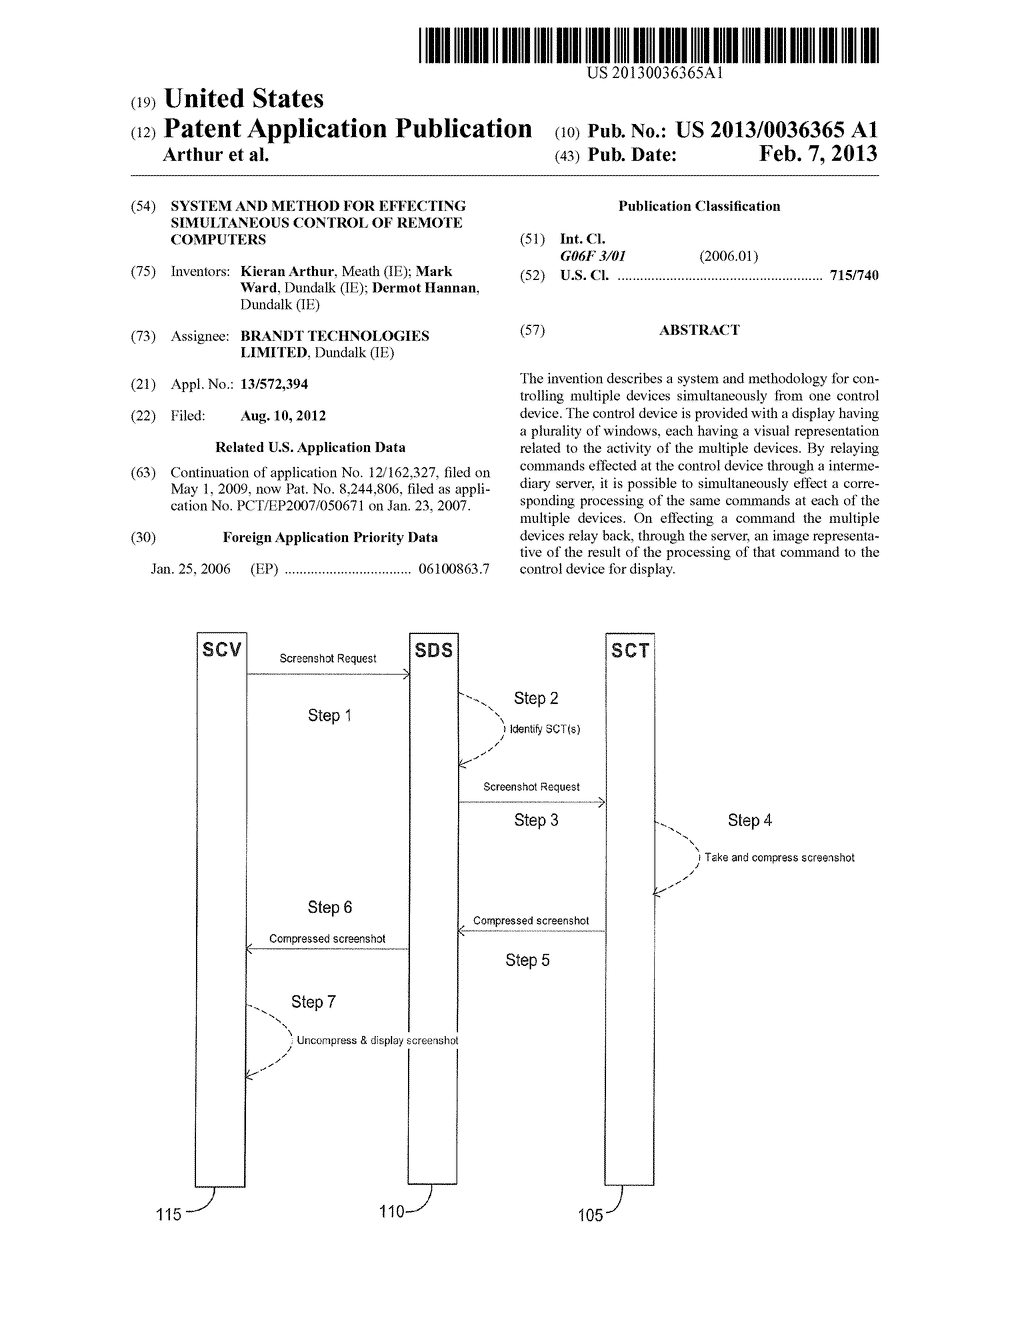 System and Method for Effecting Simultaneous Control of Remote Computers - diagram, schematic, and image 01